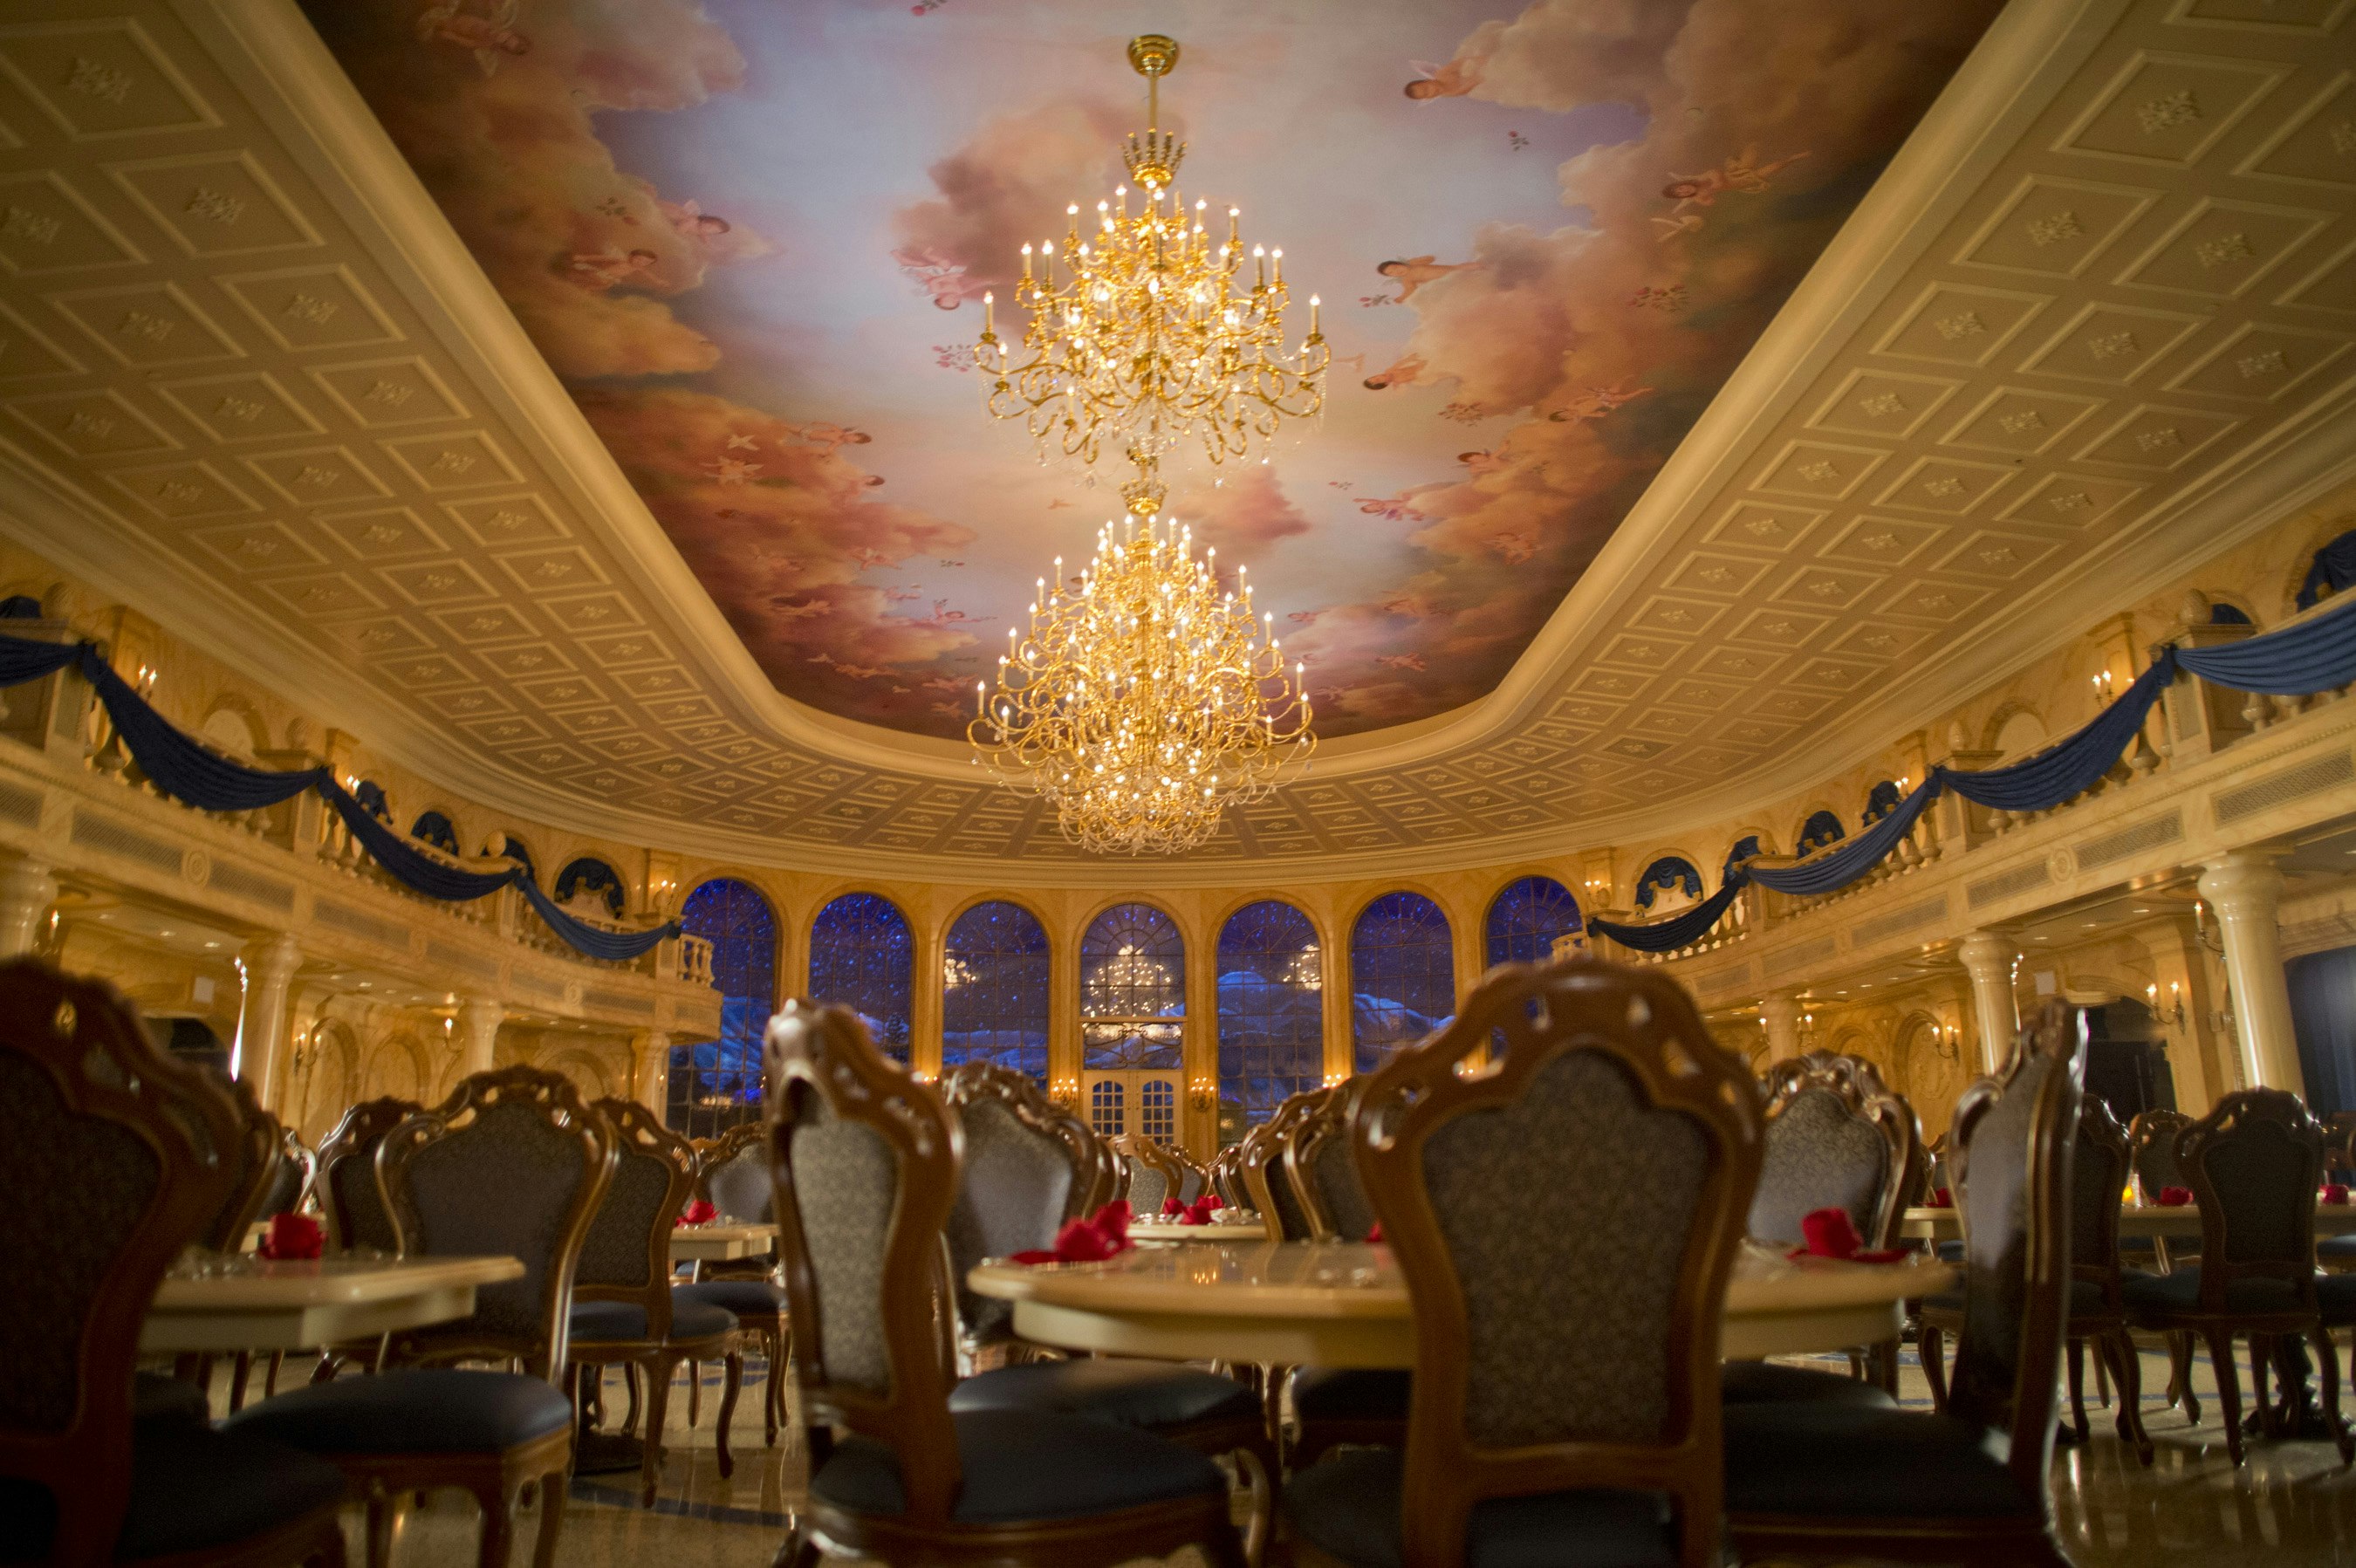 A replica of the ballroom from Disney's Beauty and the Beast, including high ceiling with clouds and cherubs painted on it and a sparkling chandelier